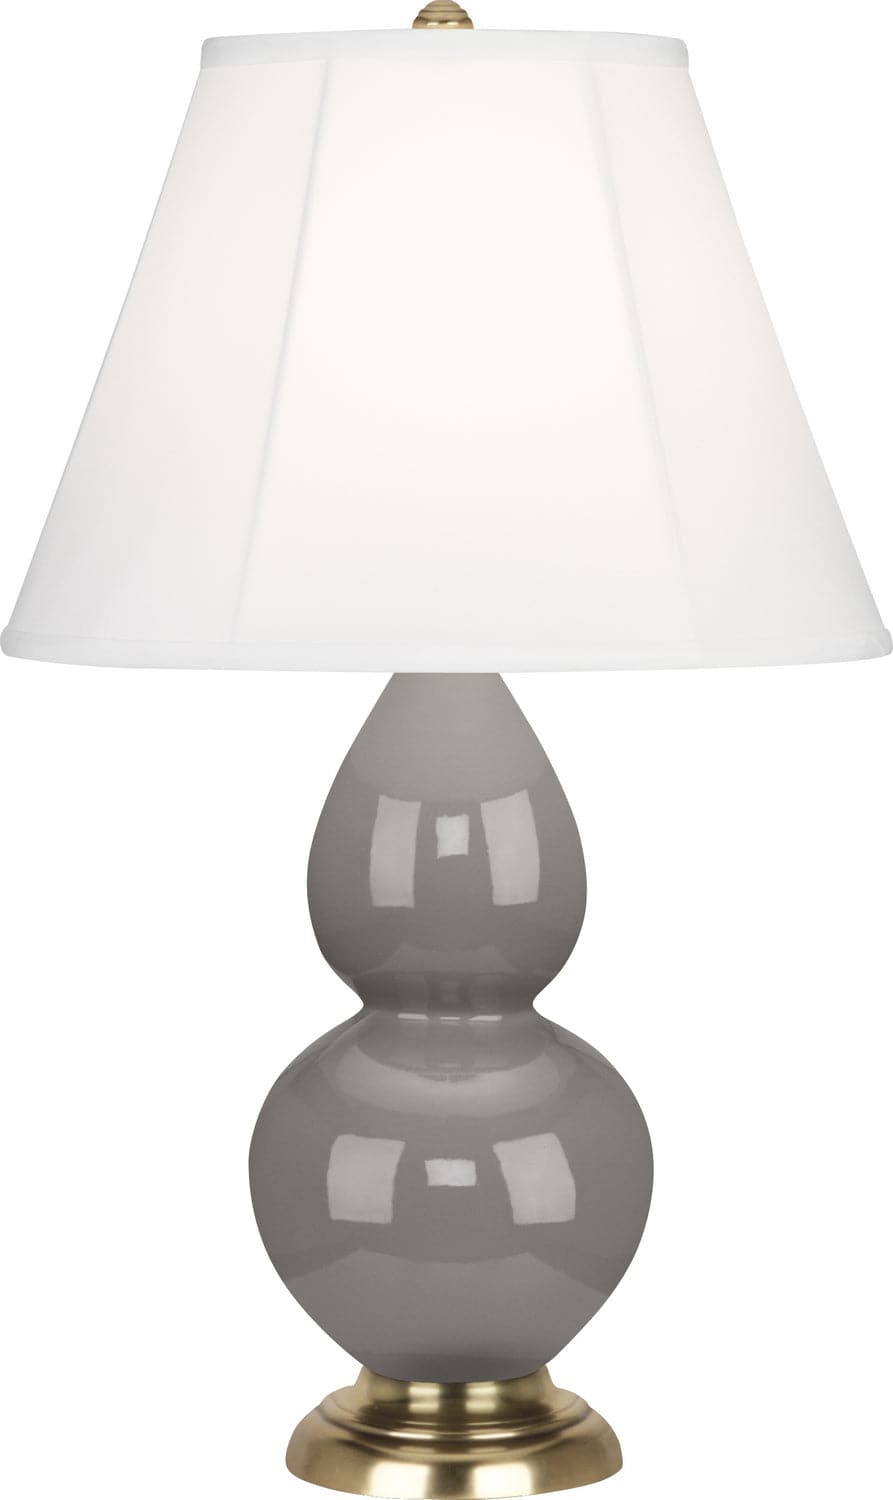 Robert Abbey - 1768 - One Light Accent Lamp - Small Double Gourd - Smoky Taupe Glazed